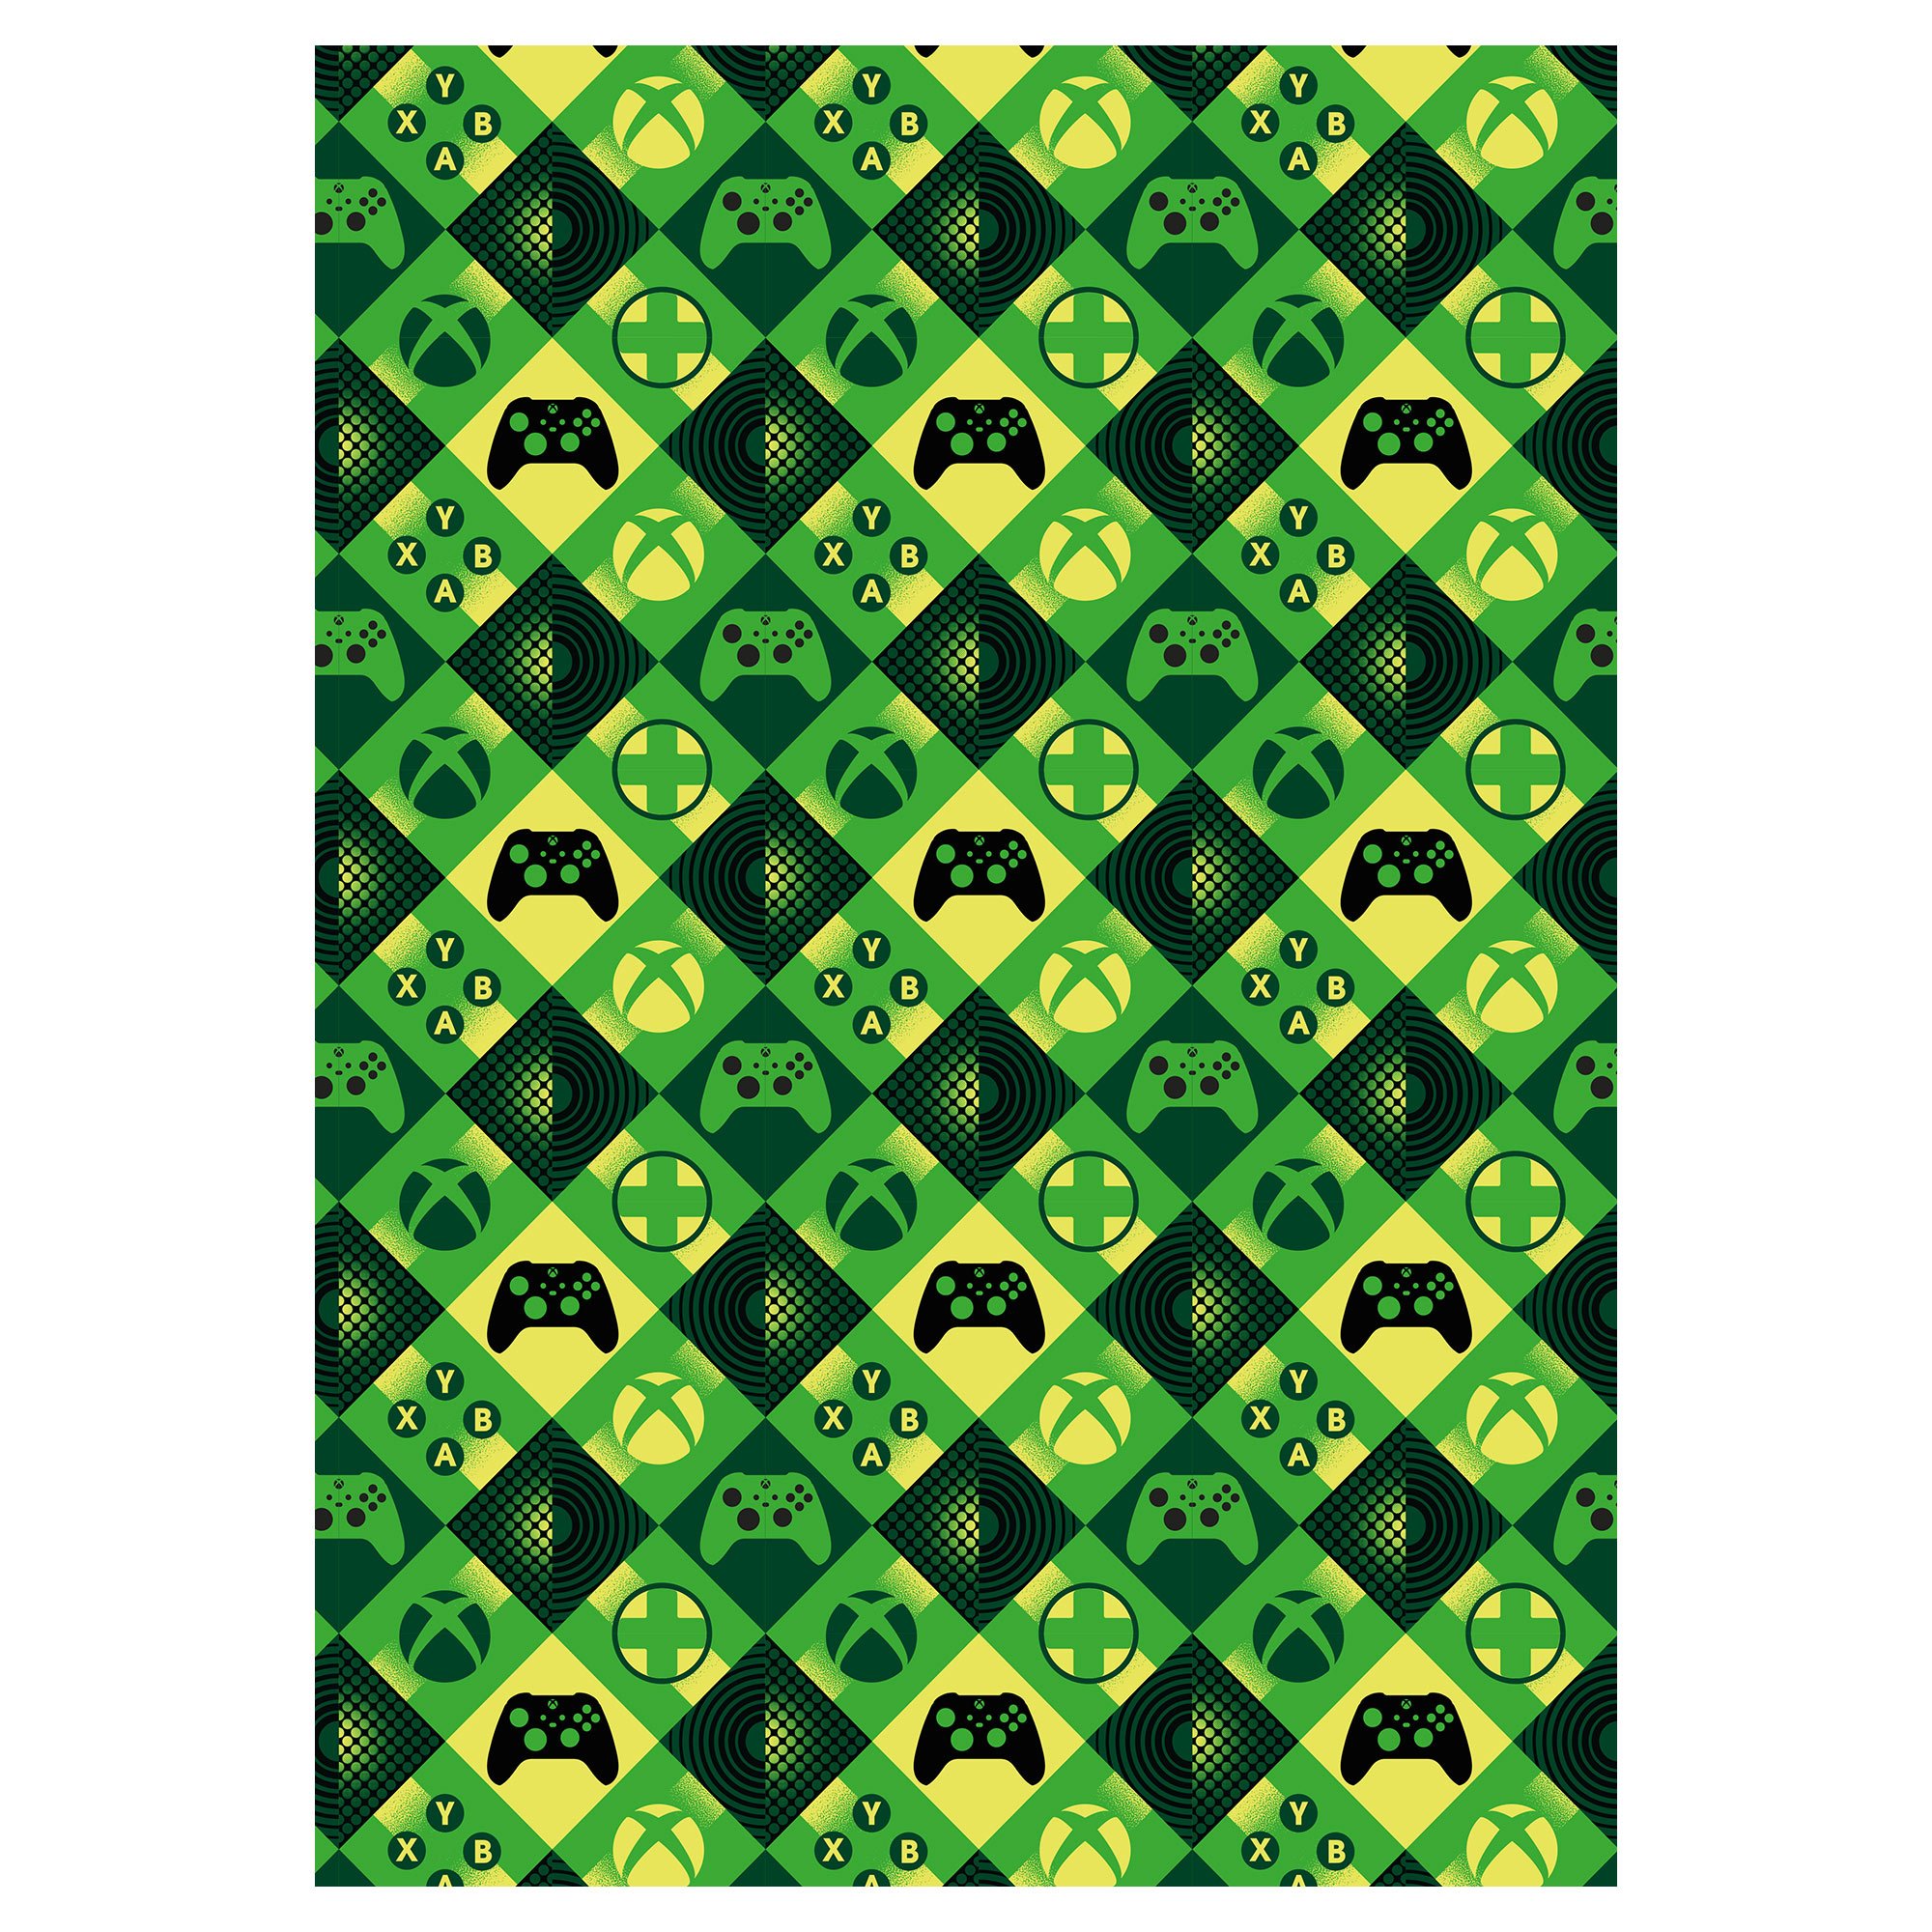 XBOX Wrapping Paper - 2 Sheets & 2 Tags